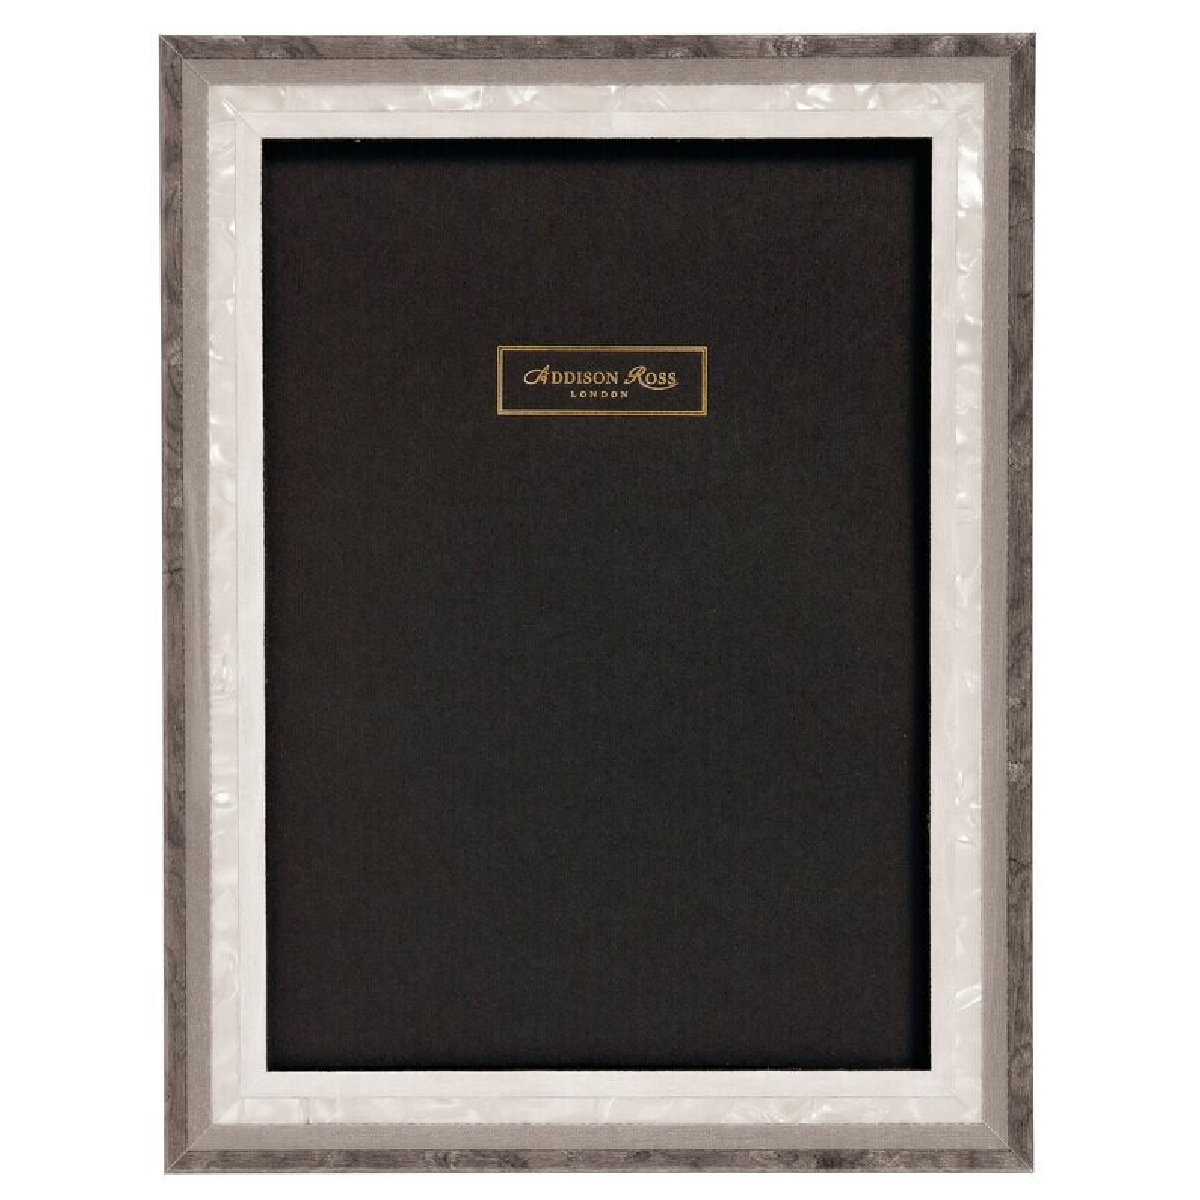 Addison Ross - Maquetry 5x7 Gray Stripe Frame